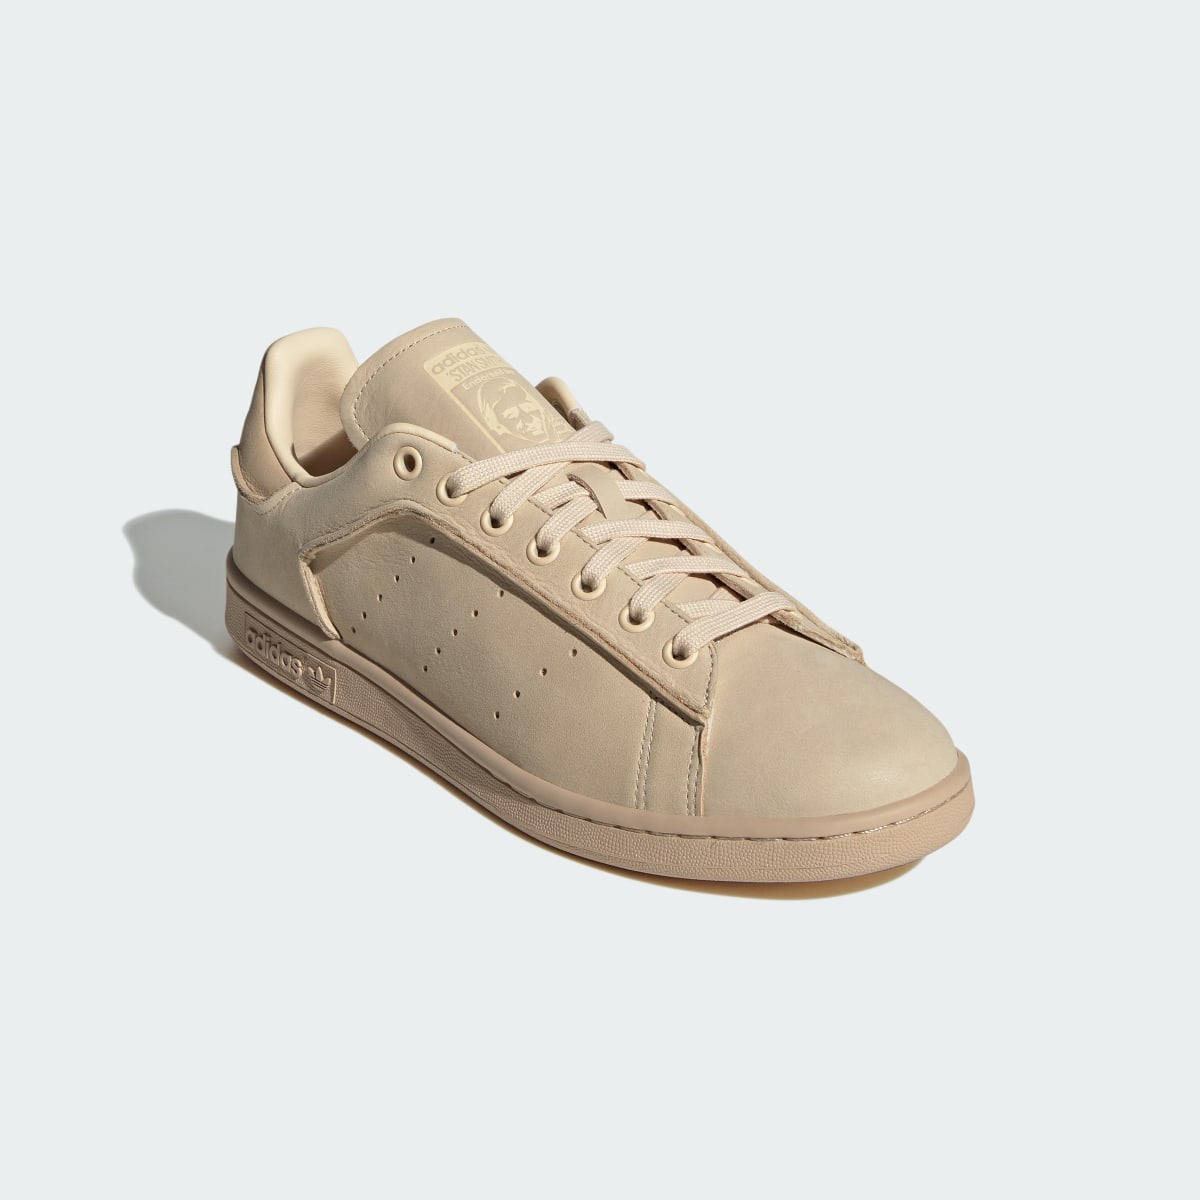 Adidas Stan Smith Luxe Shoes. 5